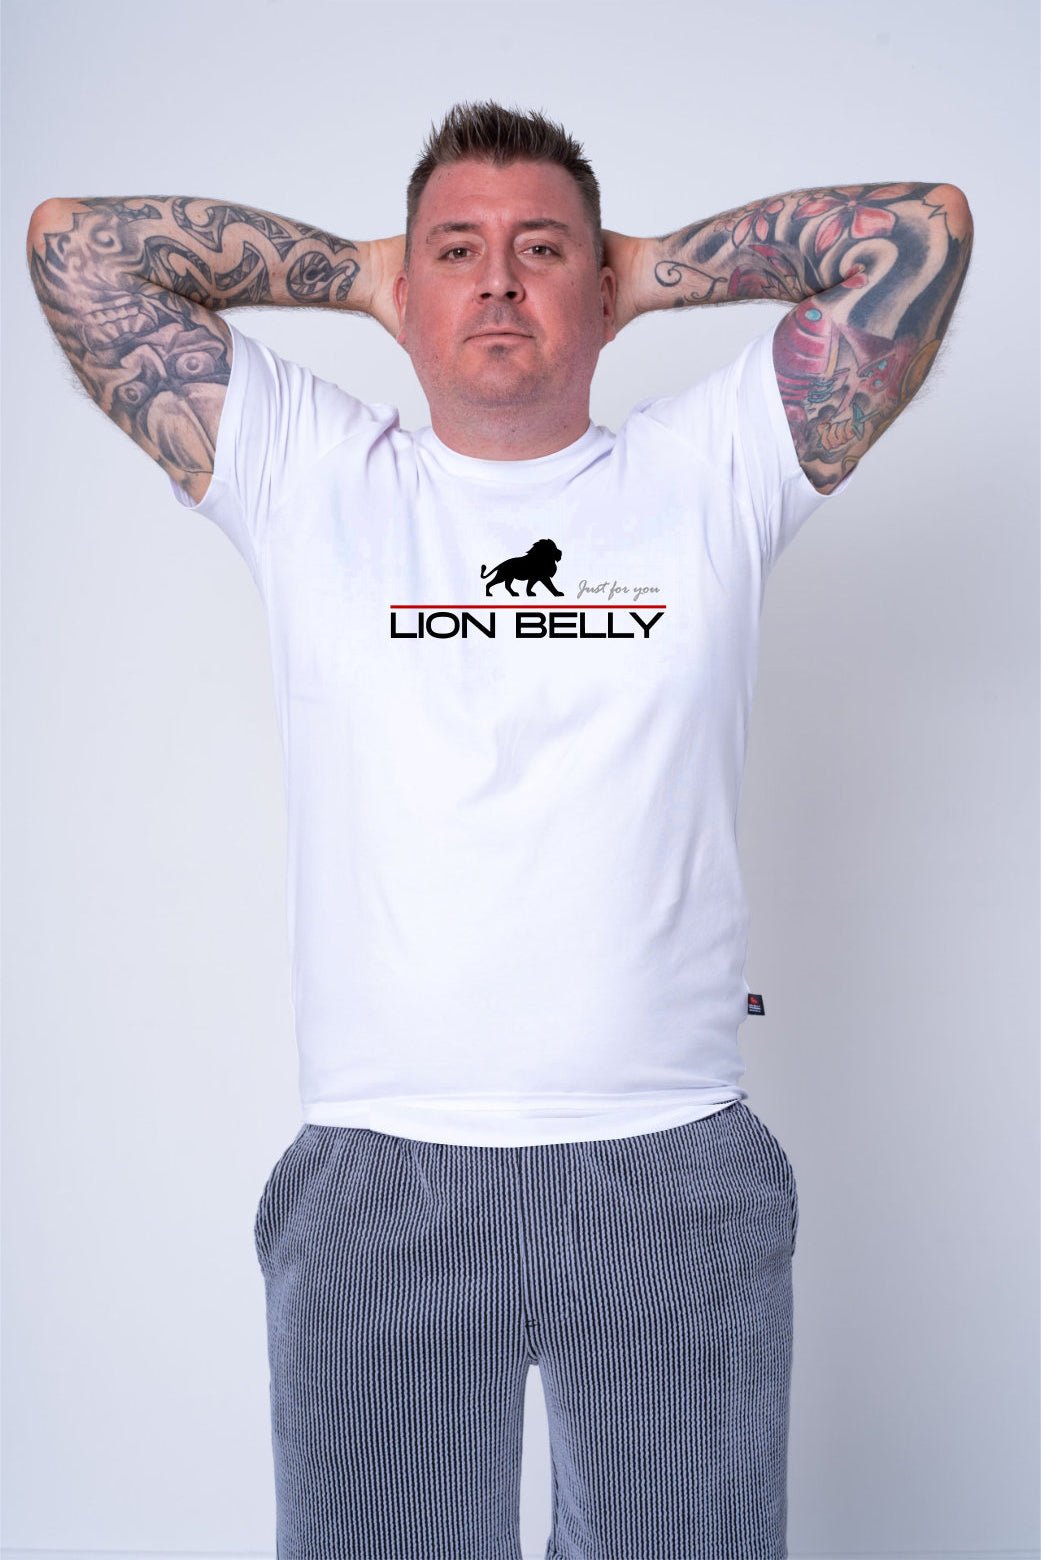 Lion Belly™ Los Angeles - lionbelly